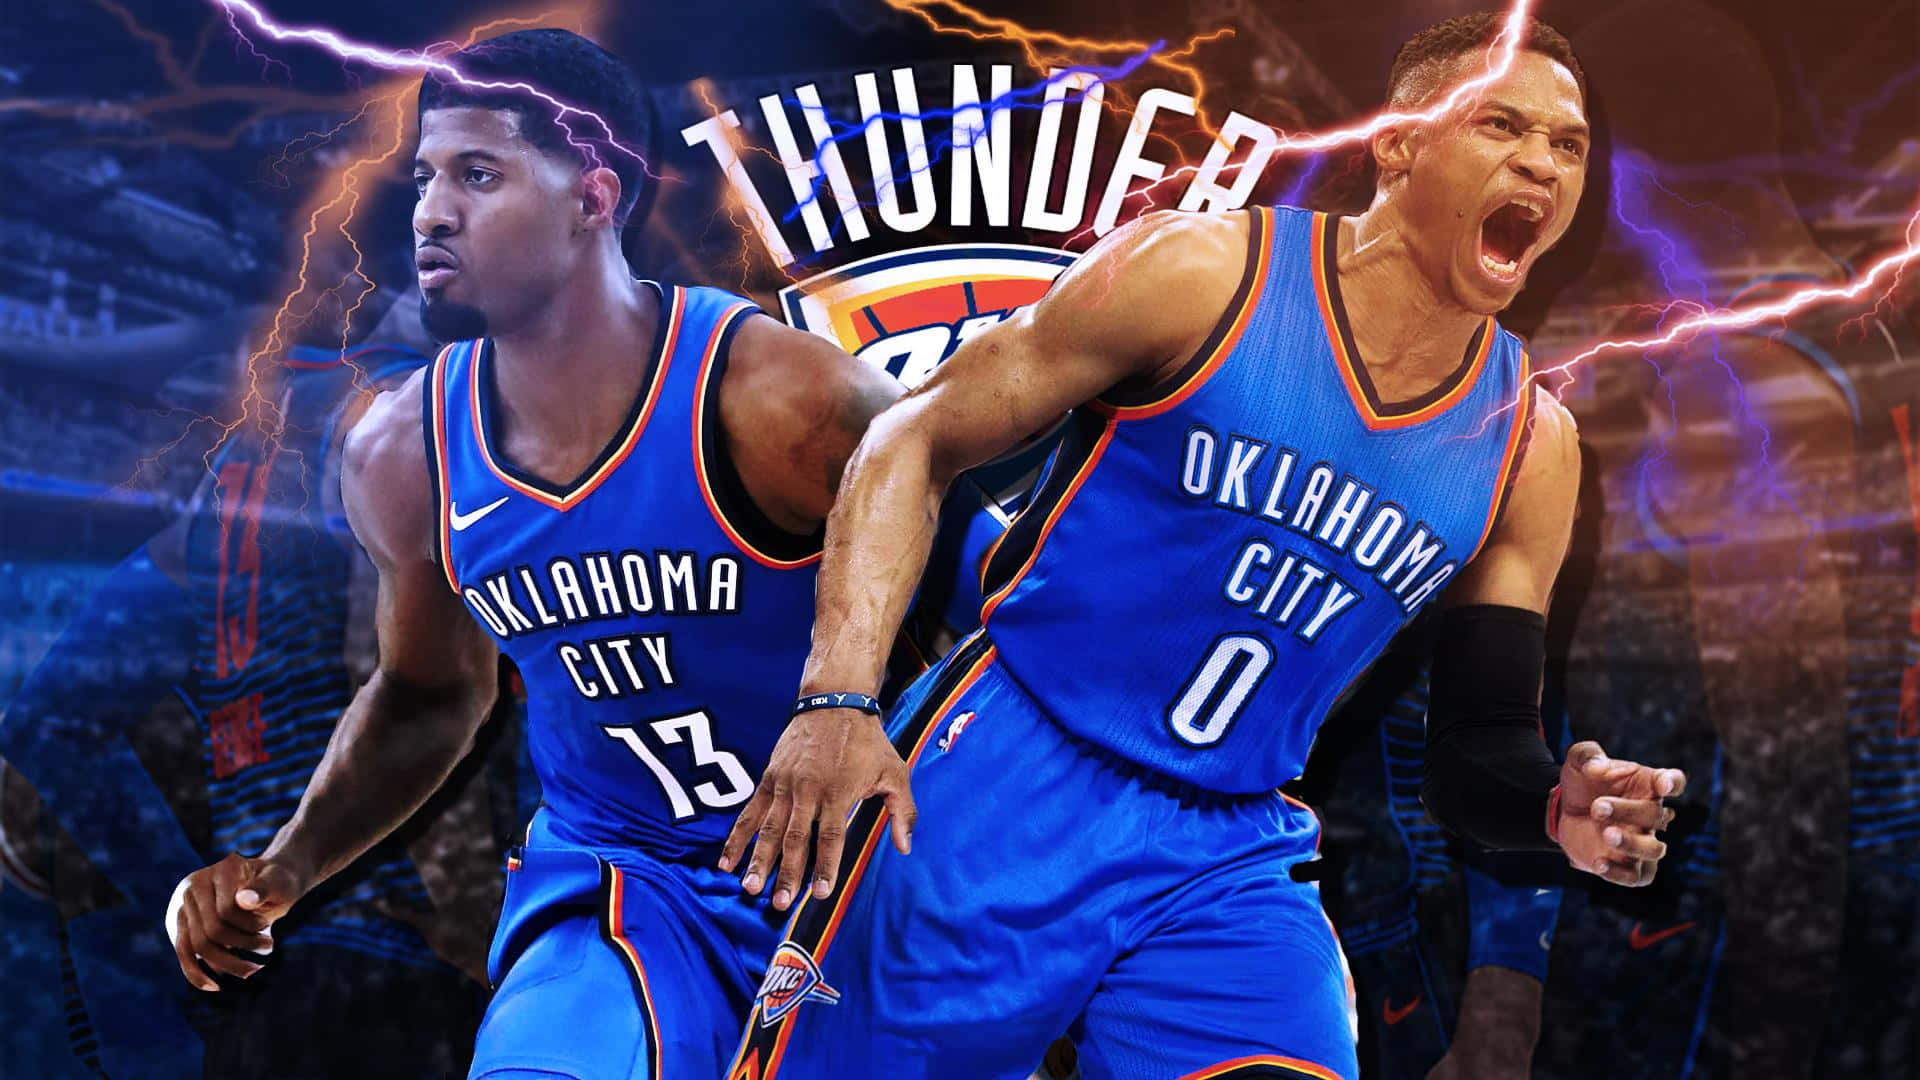 Noah Vandal on Twitter Russell Westbrook wallpaper Look at replies for  an animated version httpstco3xyUp36Z24  Twitter